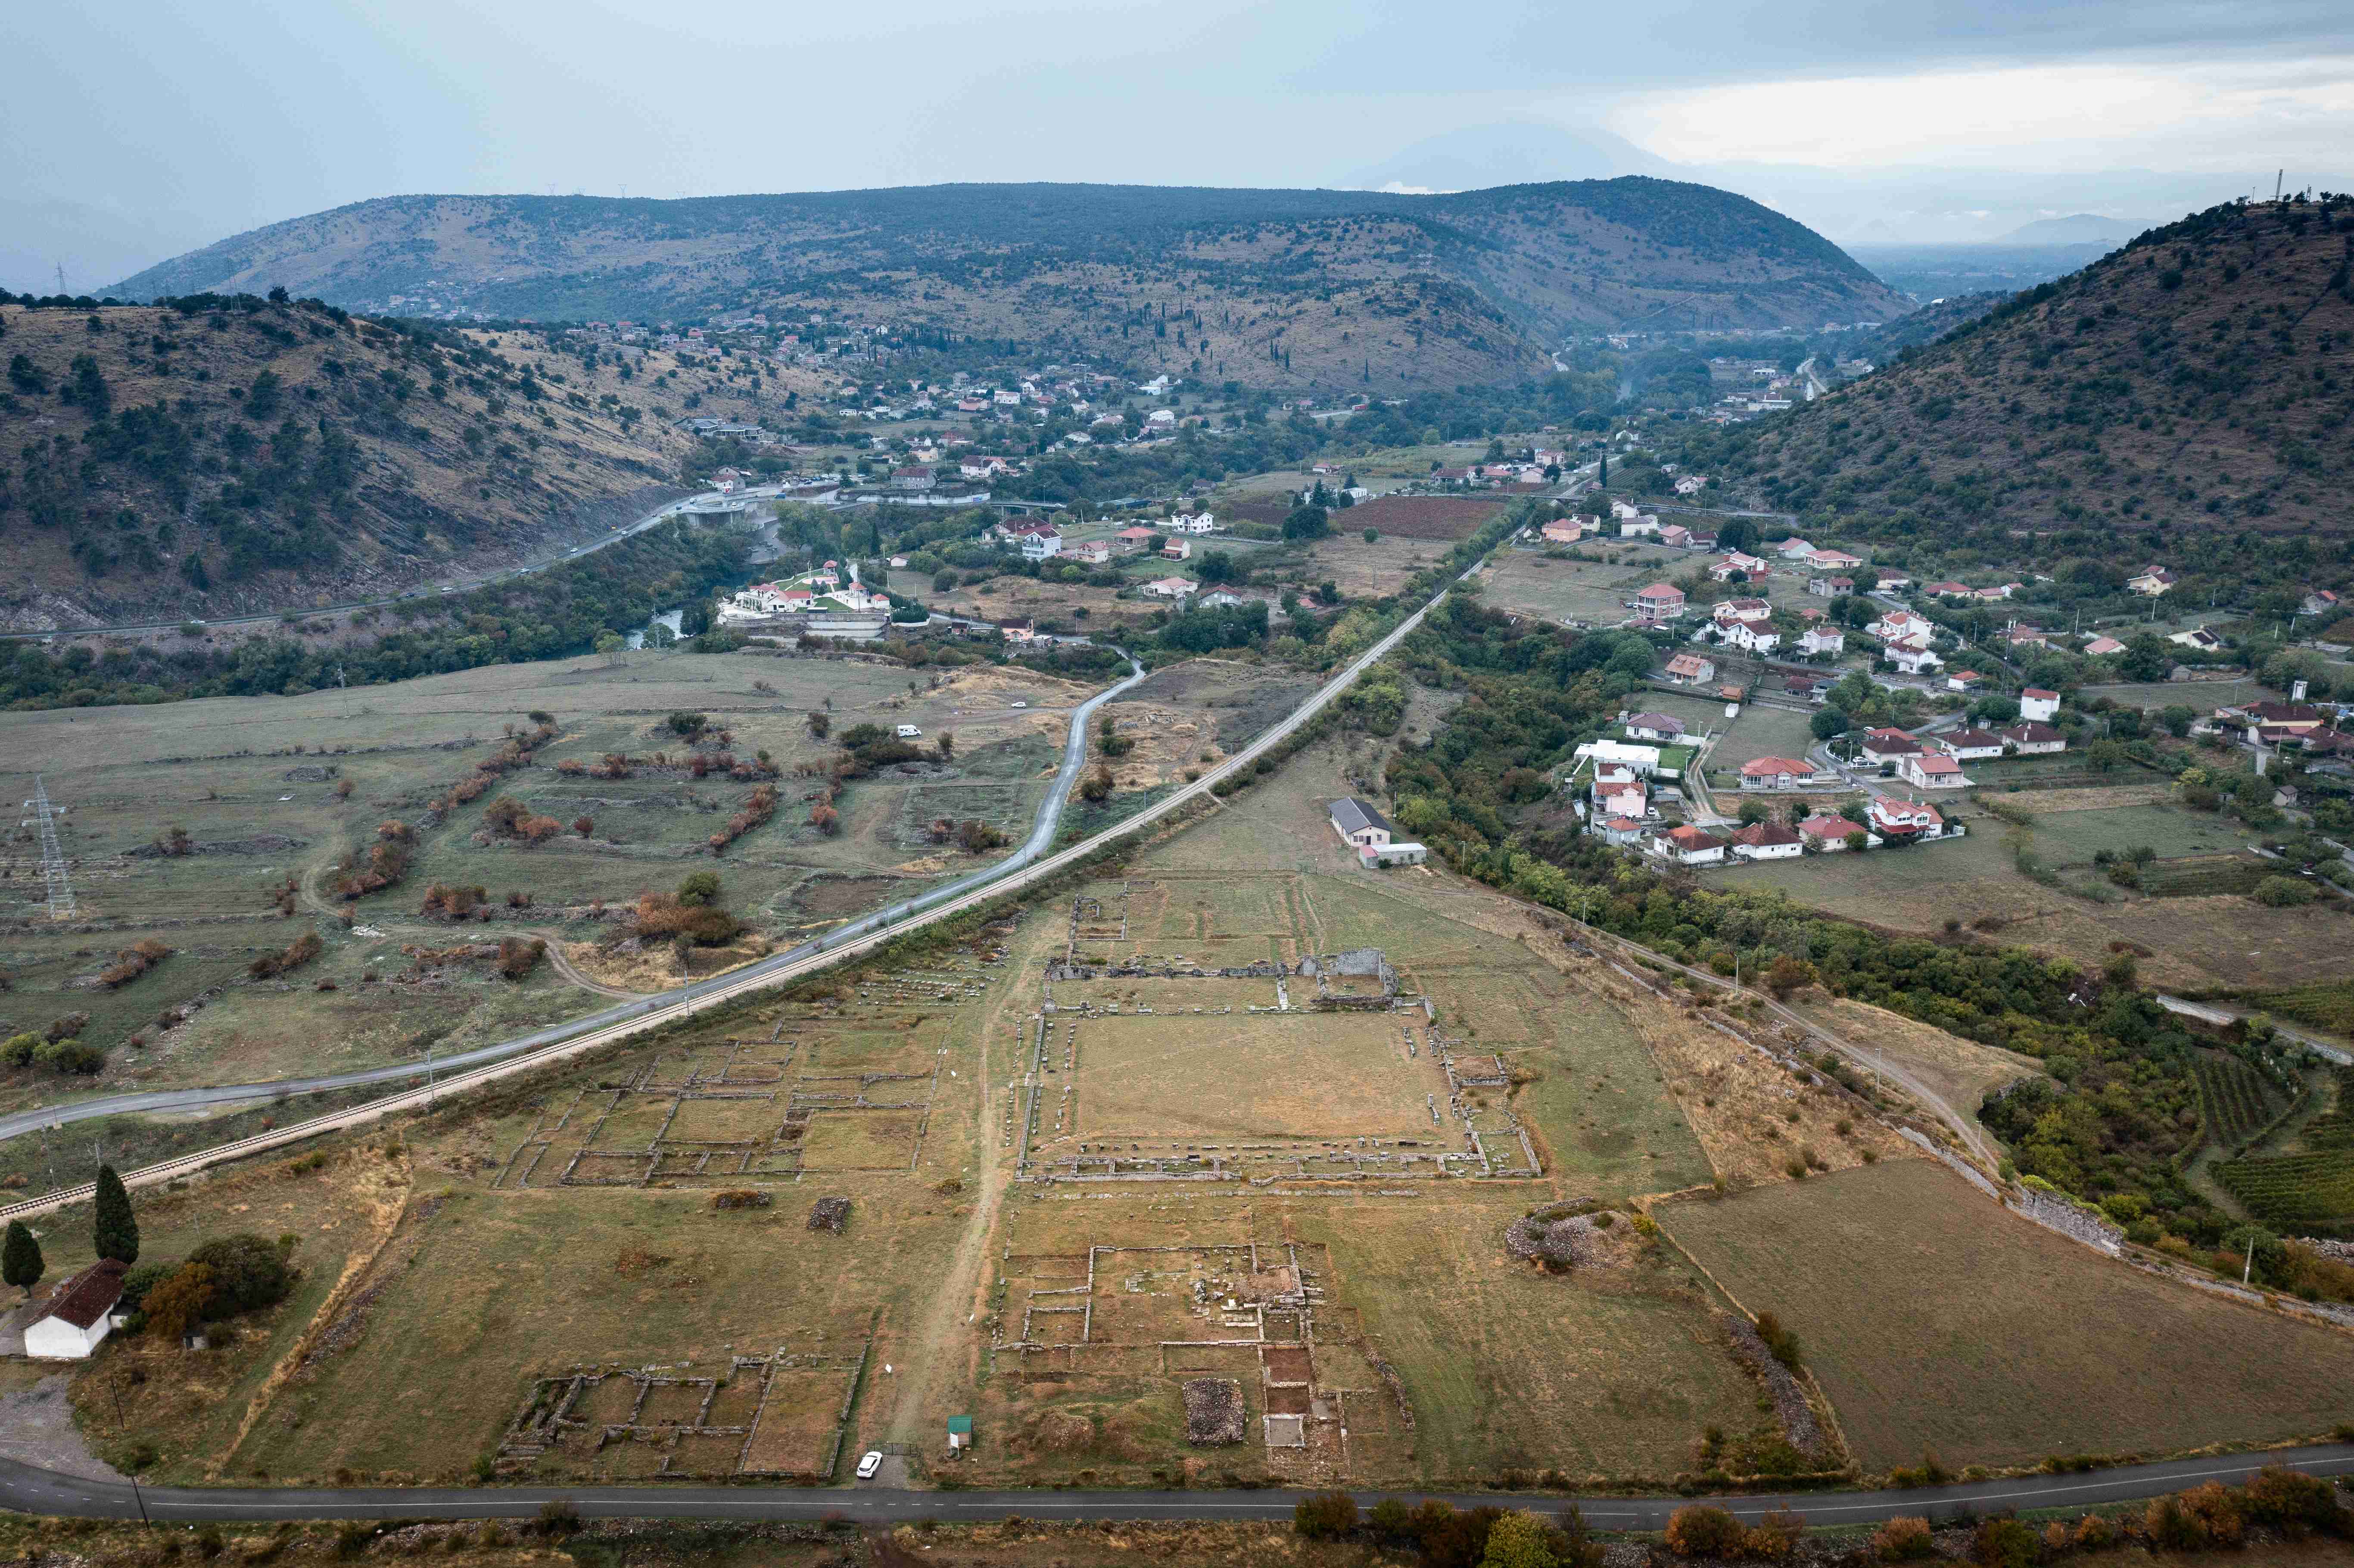 Bird's eye view of the Doclea archaeological excavation, the western part of the city in the foreground, Republic of Montenegro